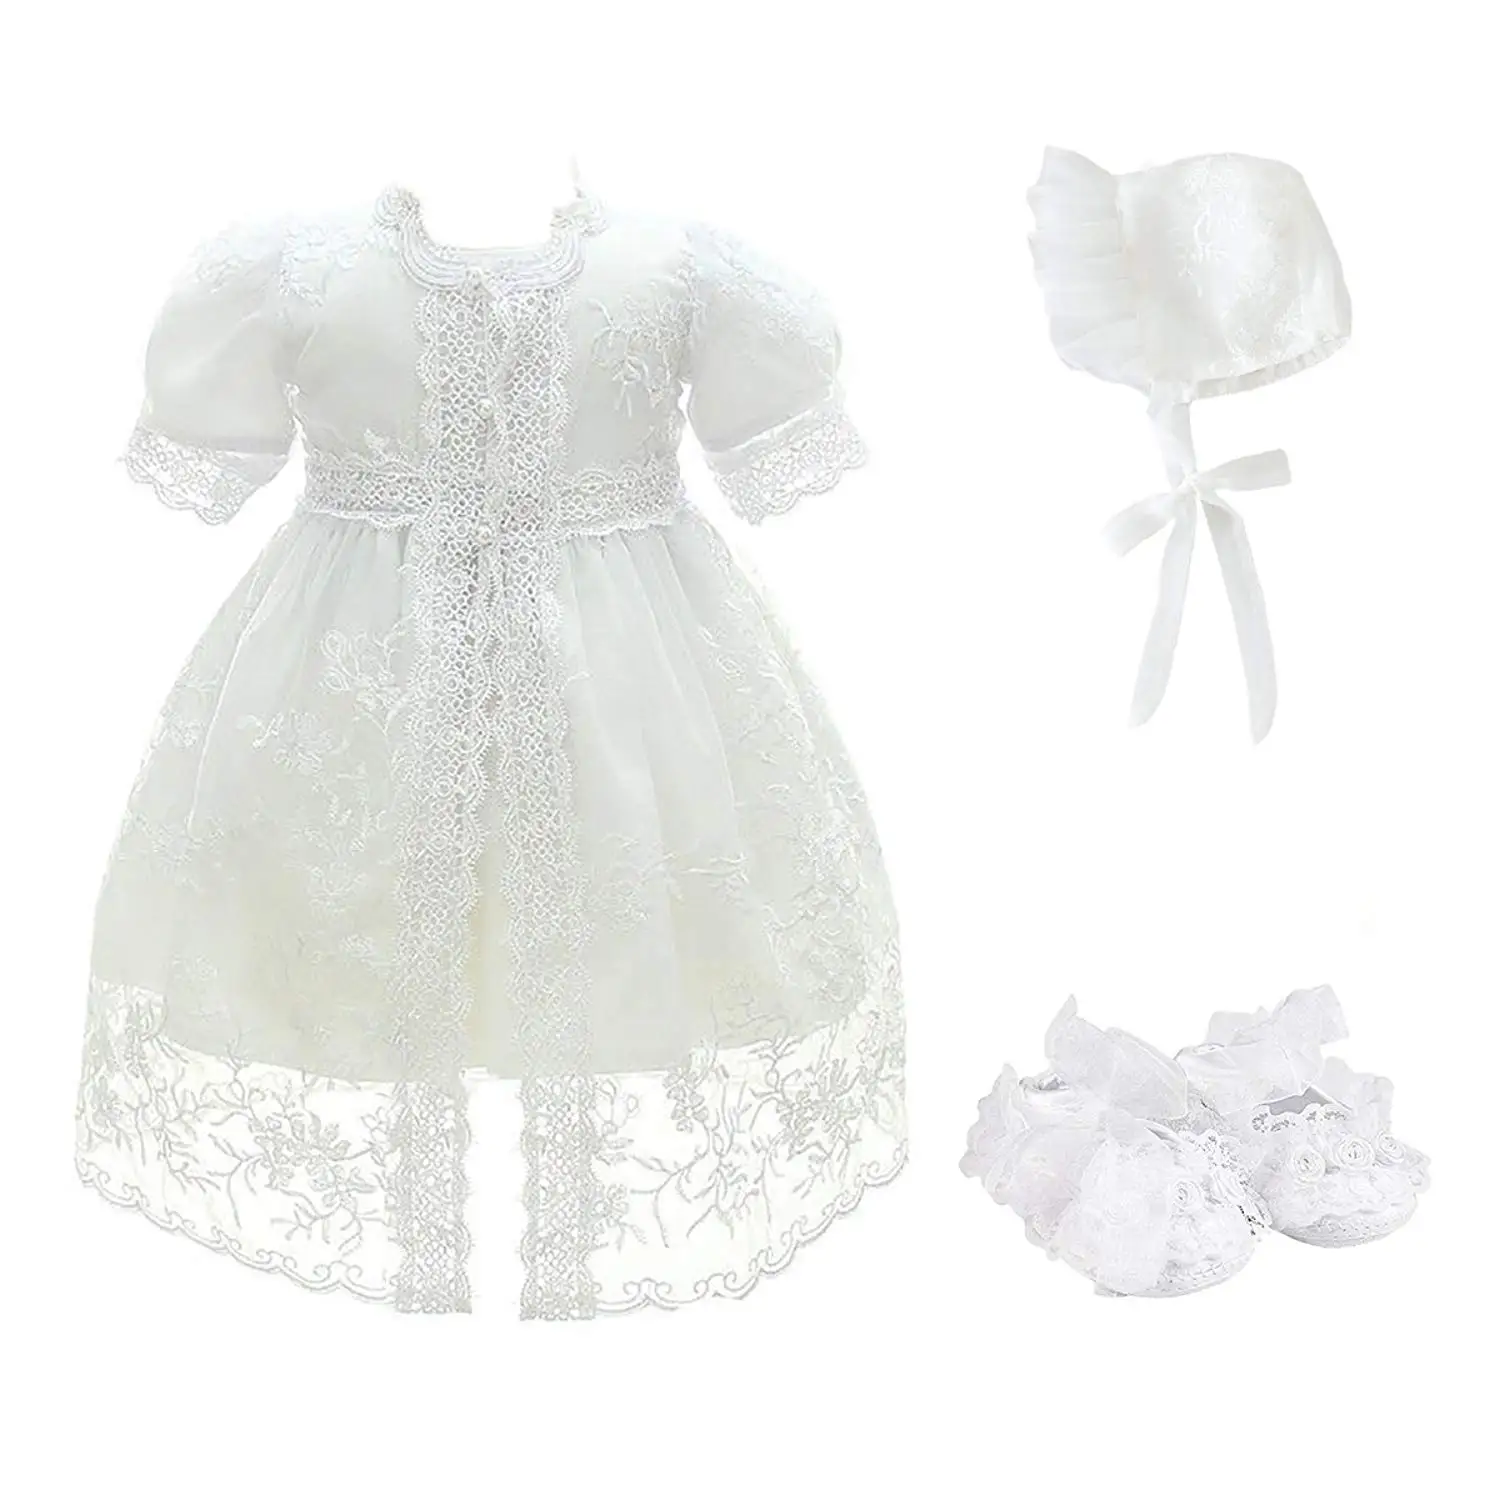 Glamulice Baby Girls Infant Lace Party Dresses Princess Wedding Birthday Formal Dress for Toddler